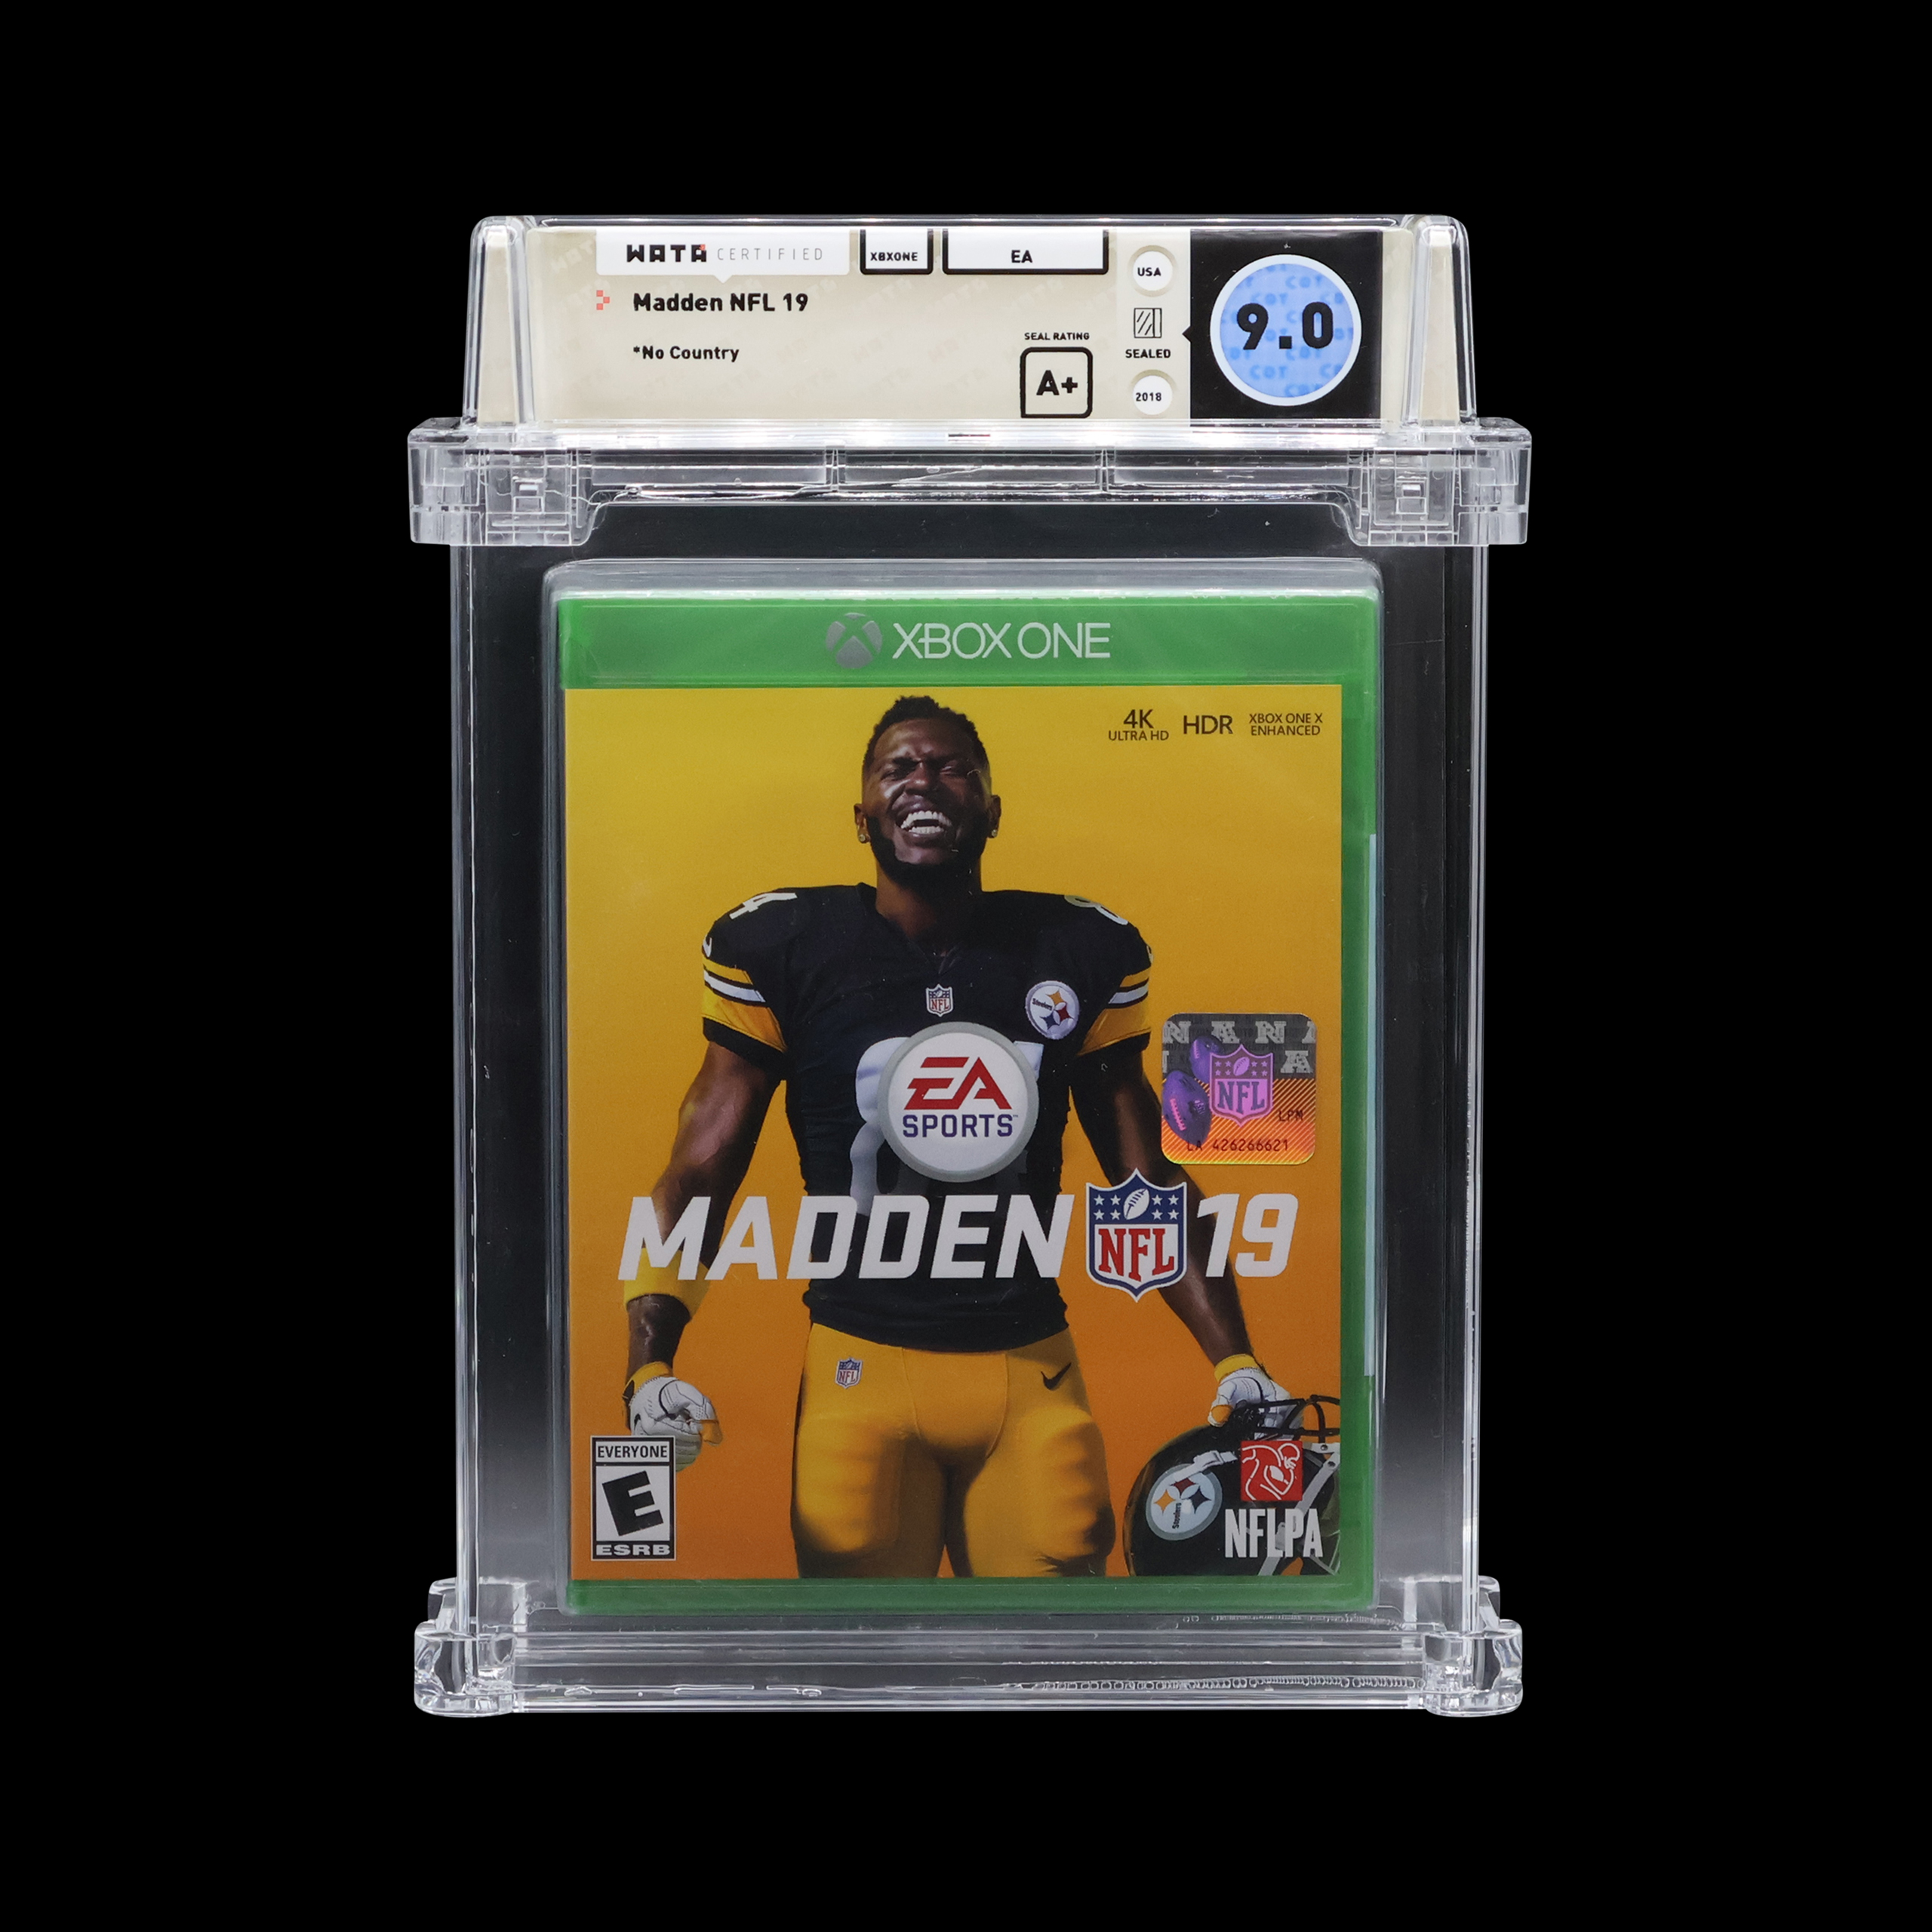 Mint condition Madden NFL 19 Xbox One game in protective slab.